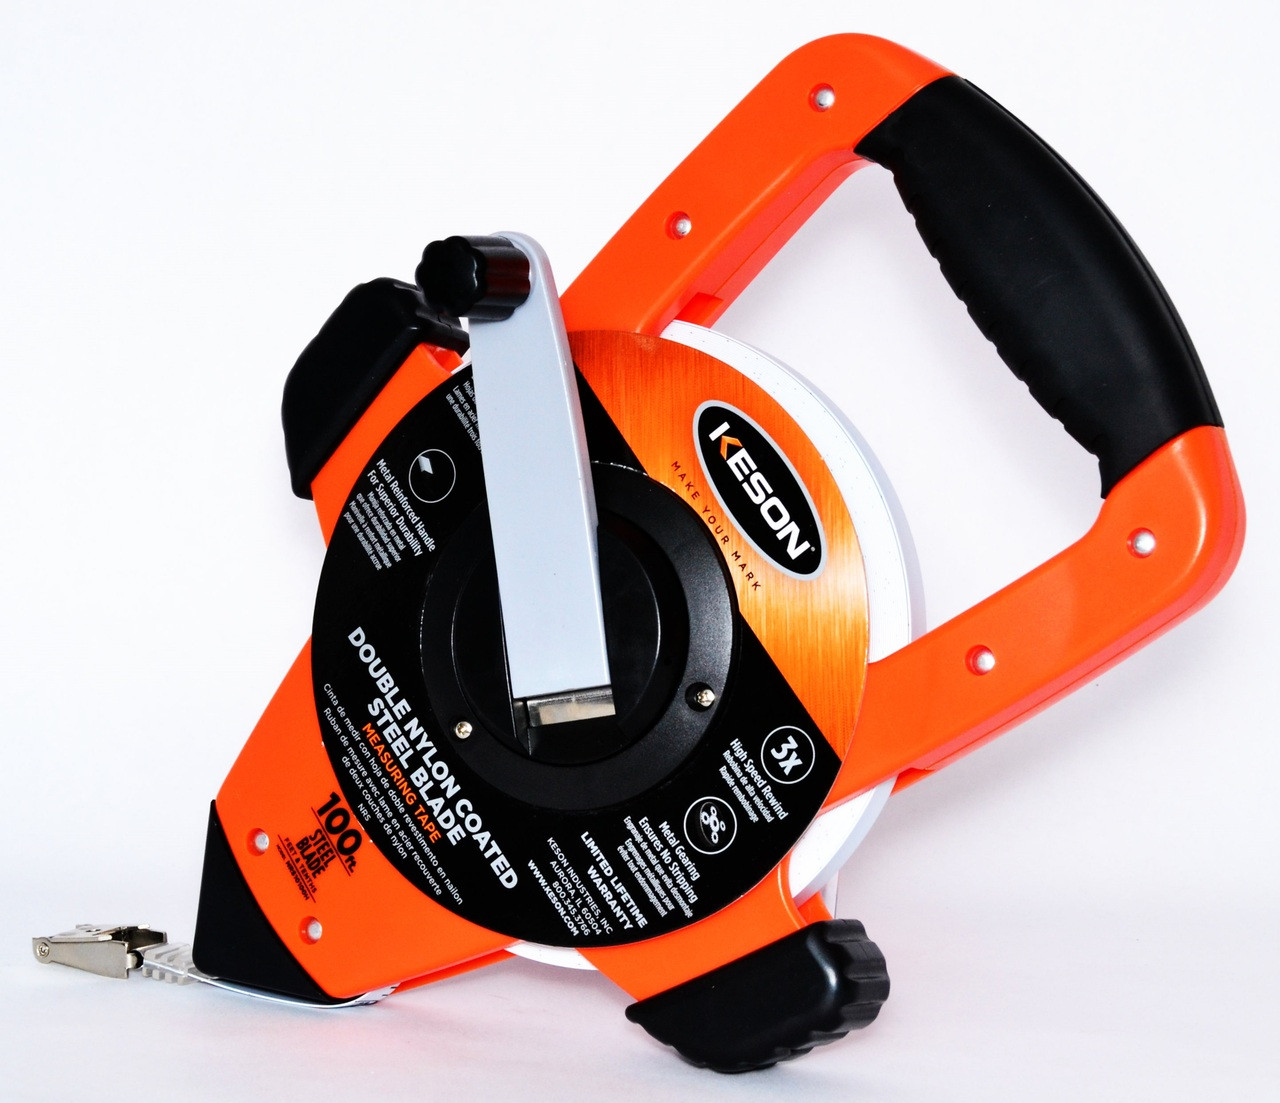 Contractor Series Tapes - Long Tape Measures